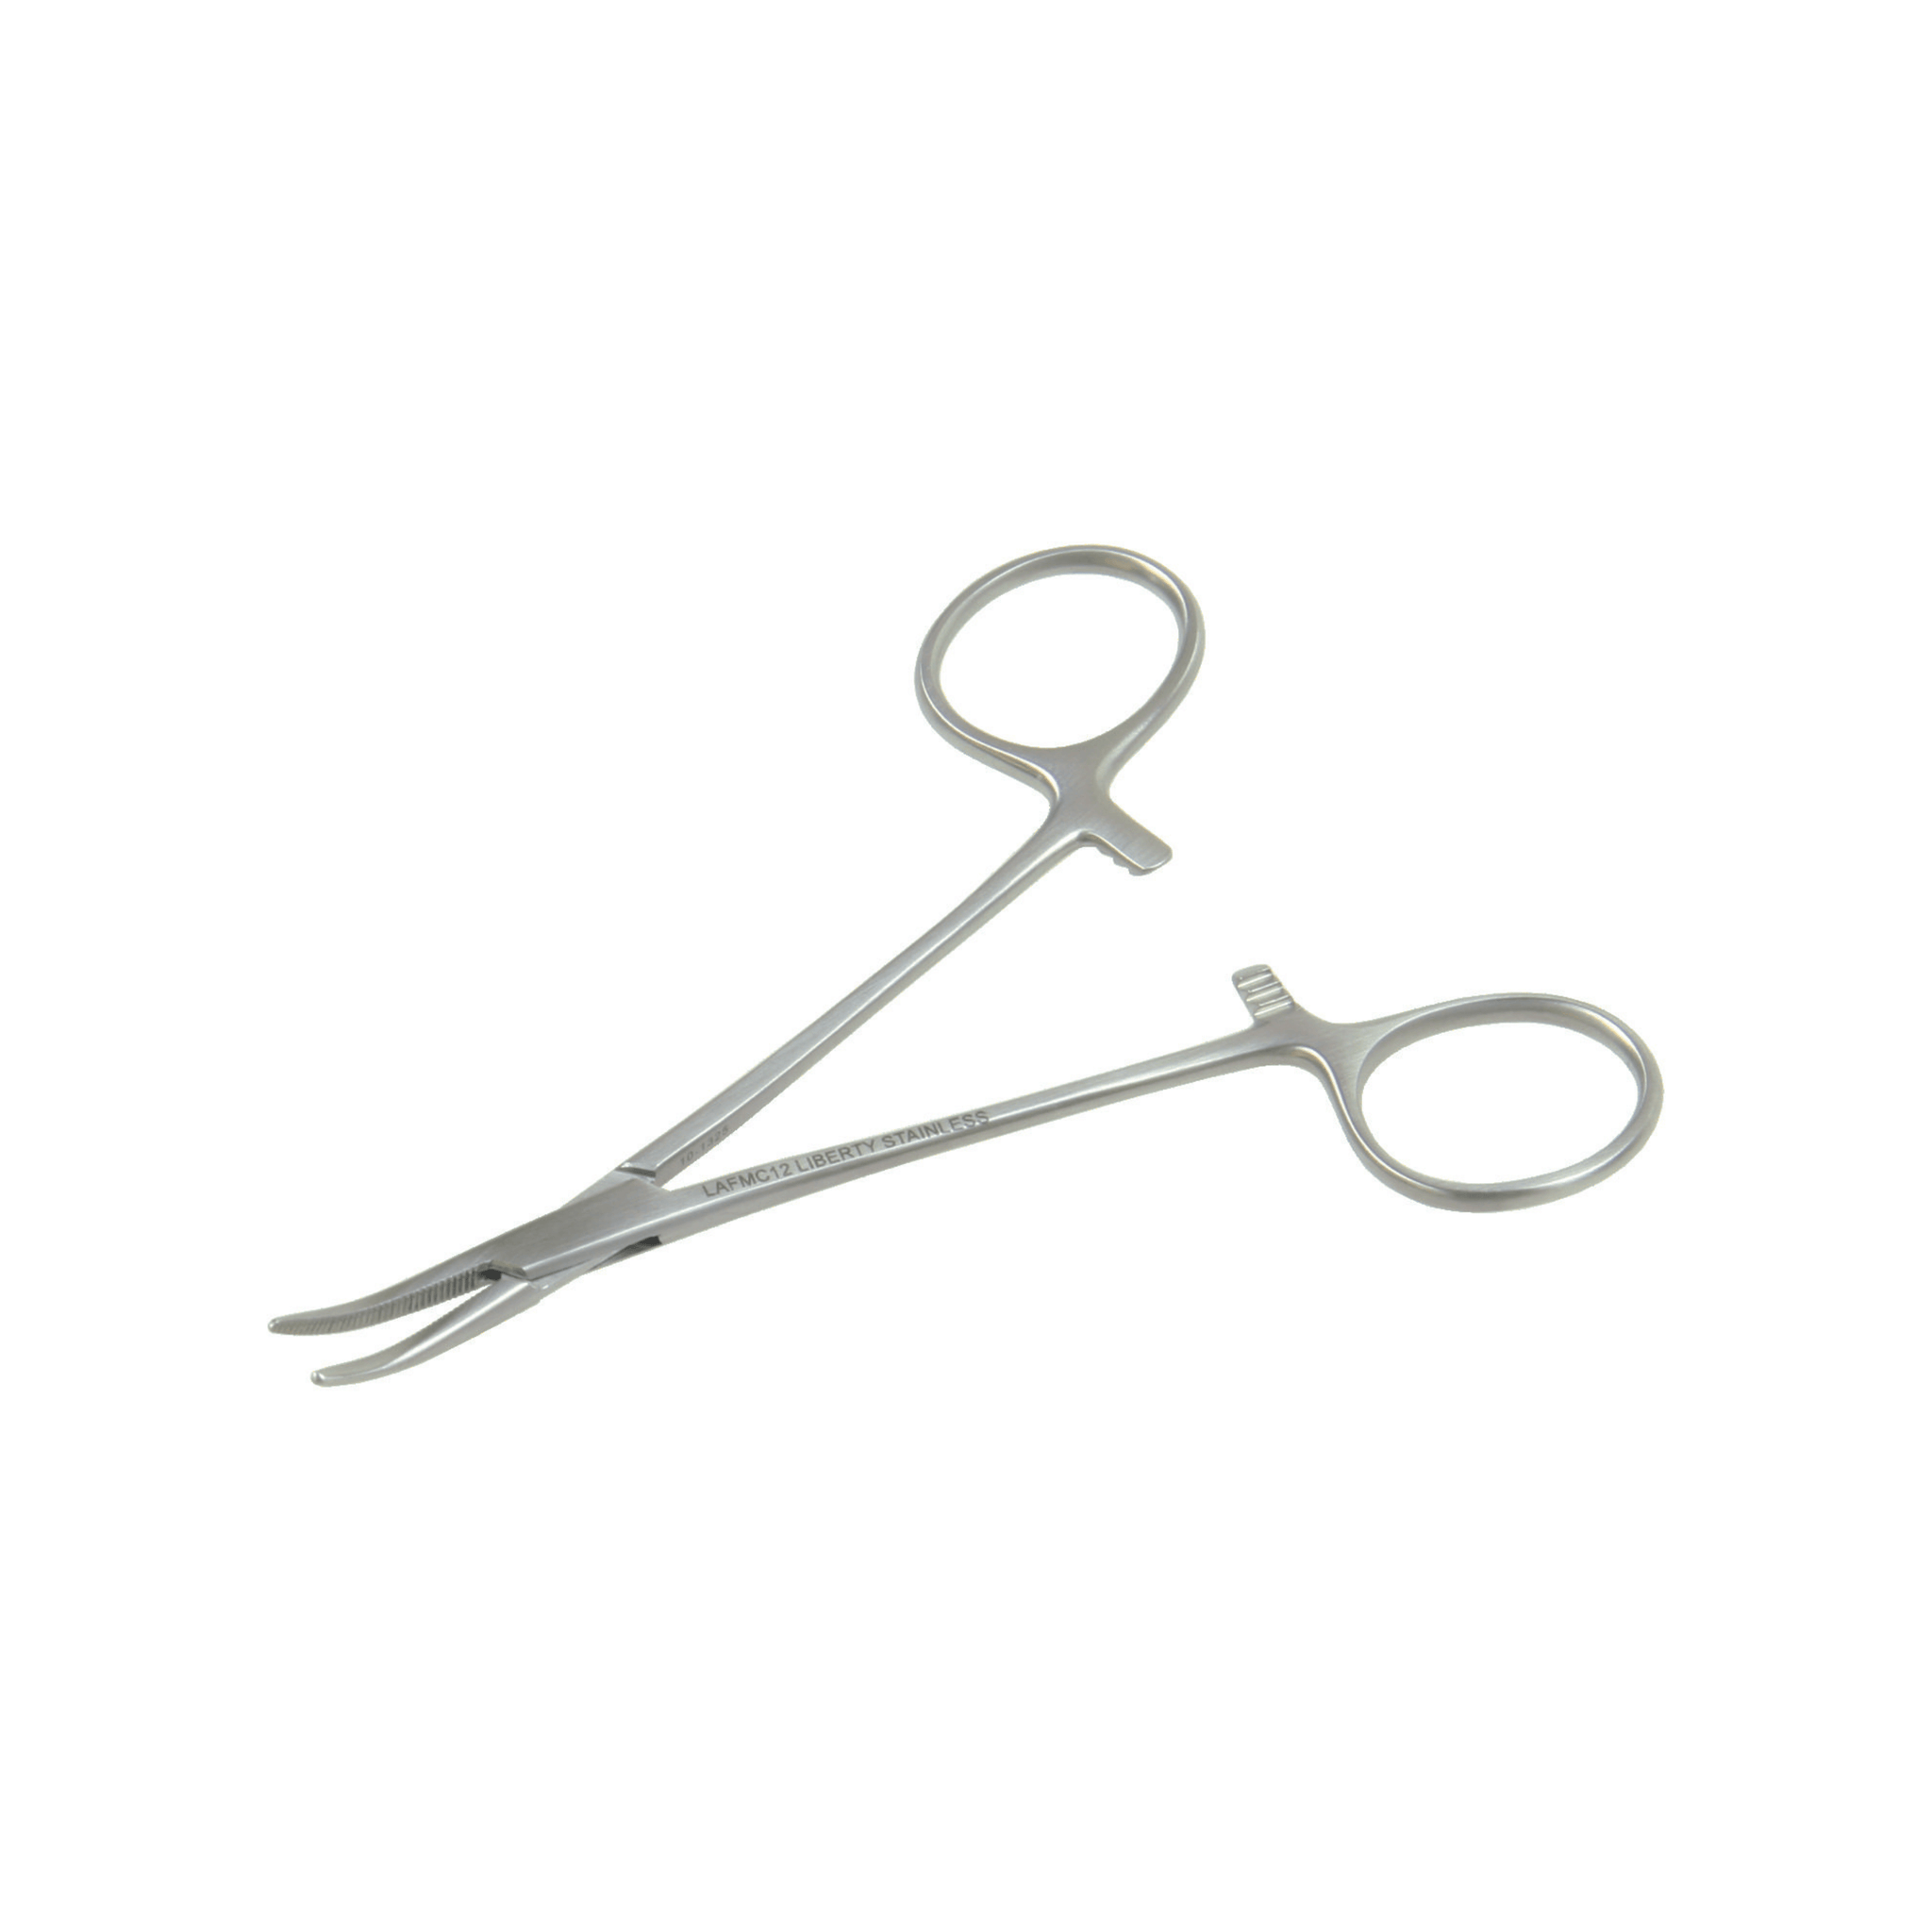 Mosquito Artery Forceps- Curved